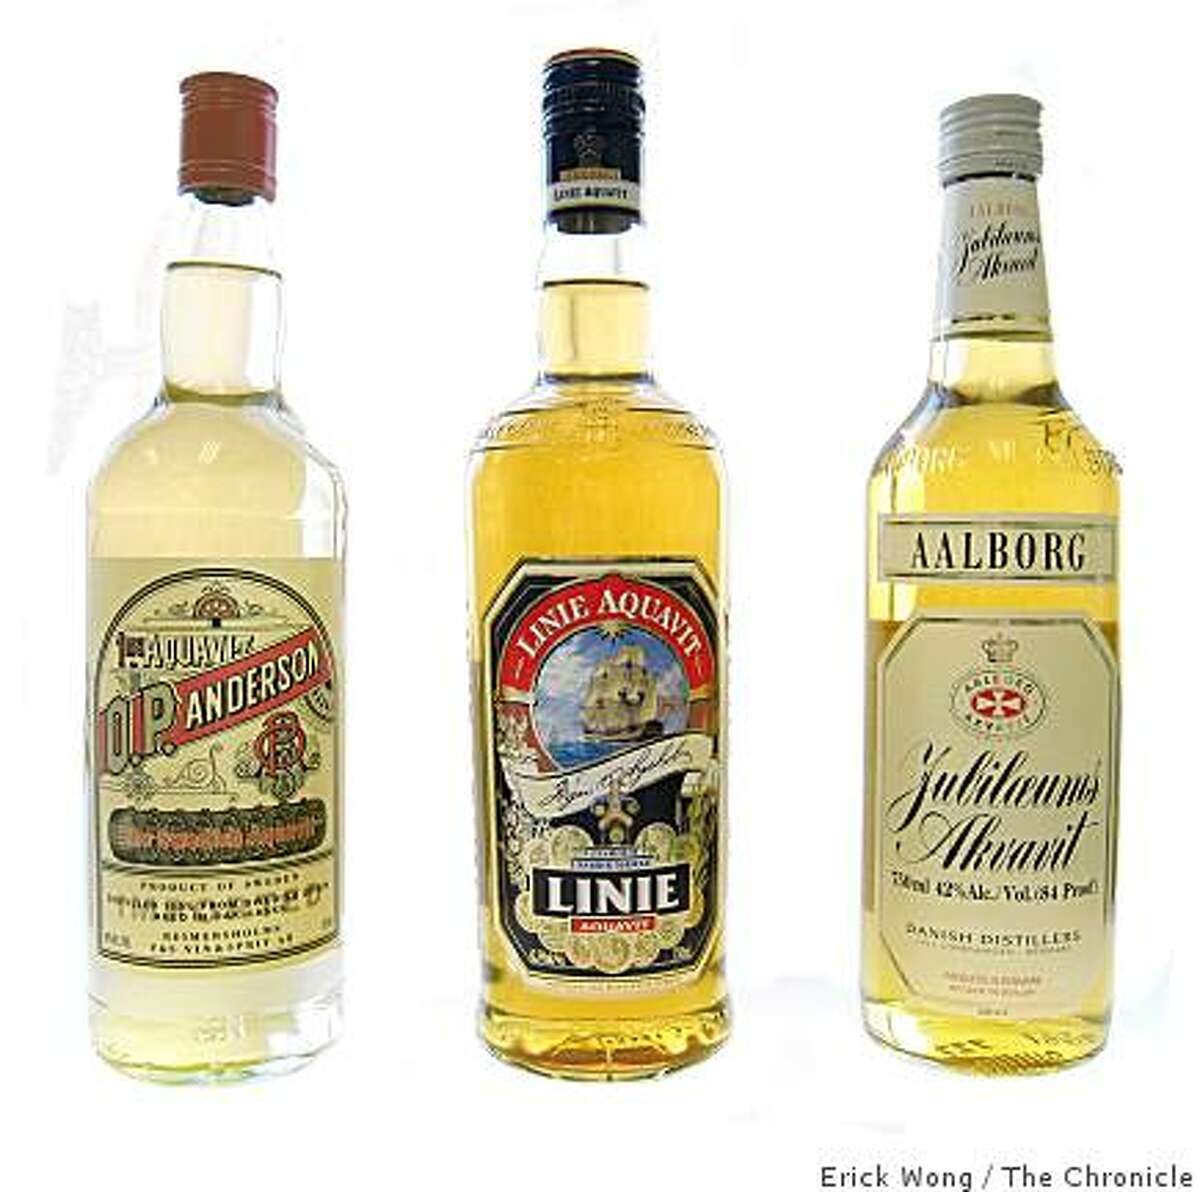 From left, aquavits from Scandinavia: O.P. Anderson from Sweden; Linie Aquavit from Norway; Jubiloeums Akvavit from Denmark.